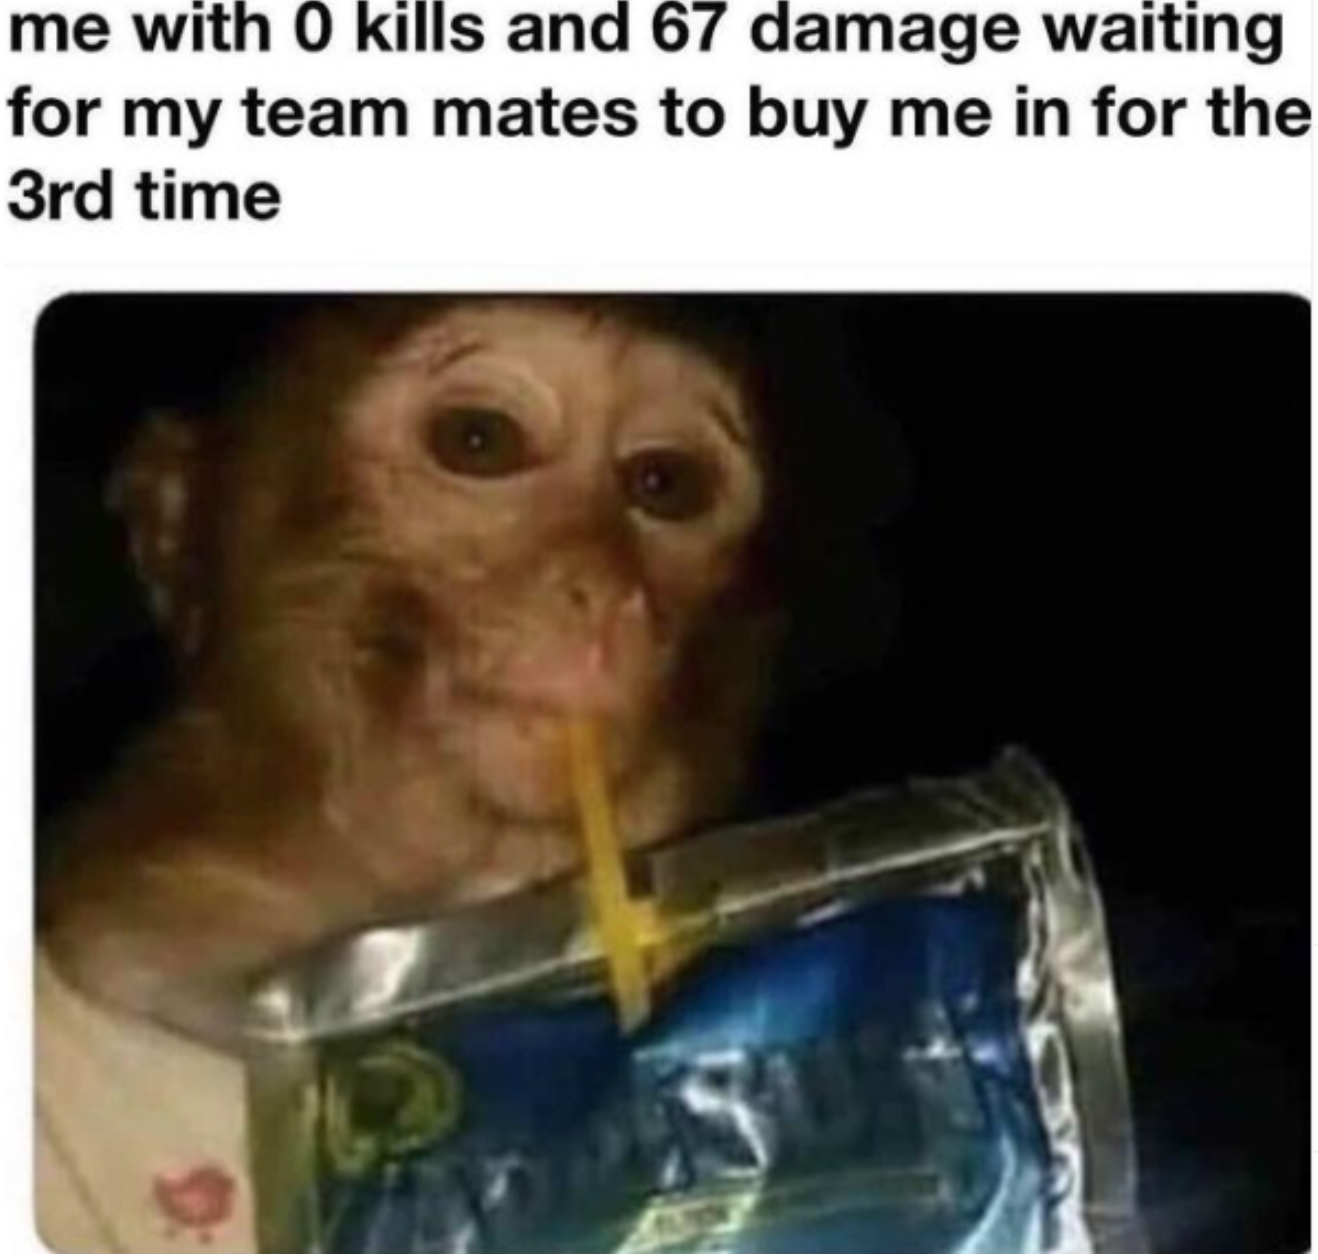 monkey drinking capri sun - me with 0 kills and 67 damage waiting for my team mates to buy me in for the 3rd time